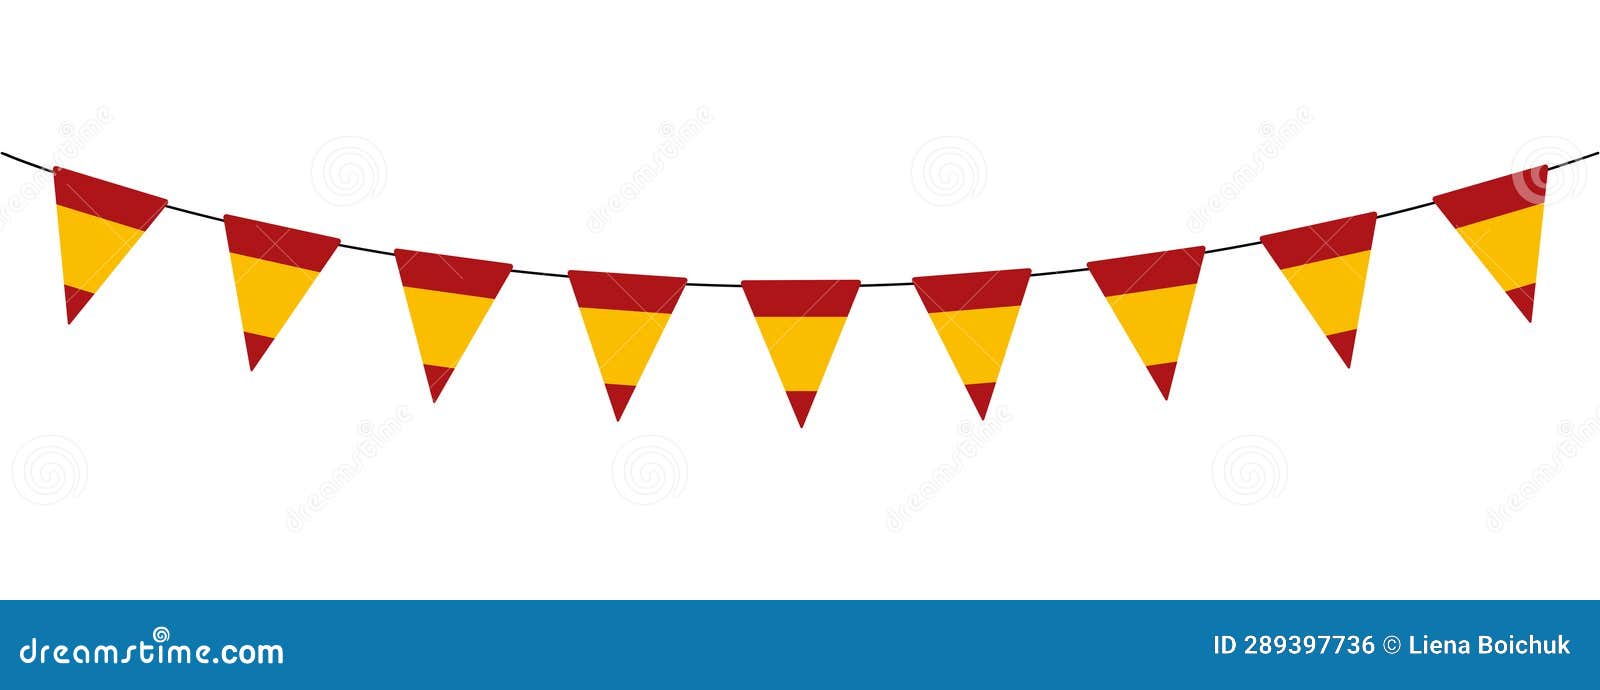 spain bunting garland, string of red and yellow pennants,  decorative , spanish national day, fiesta